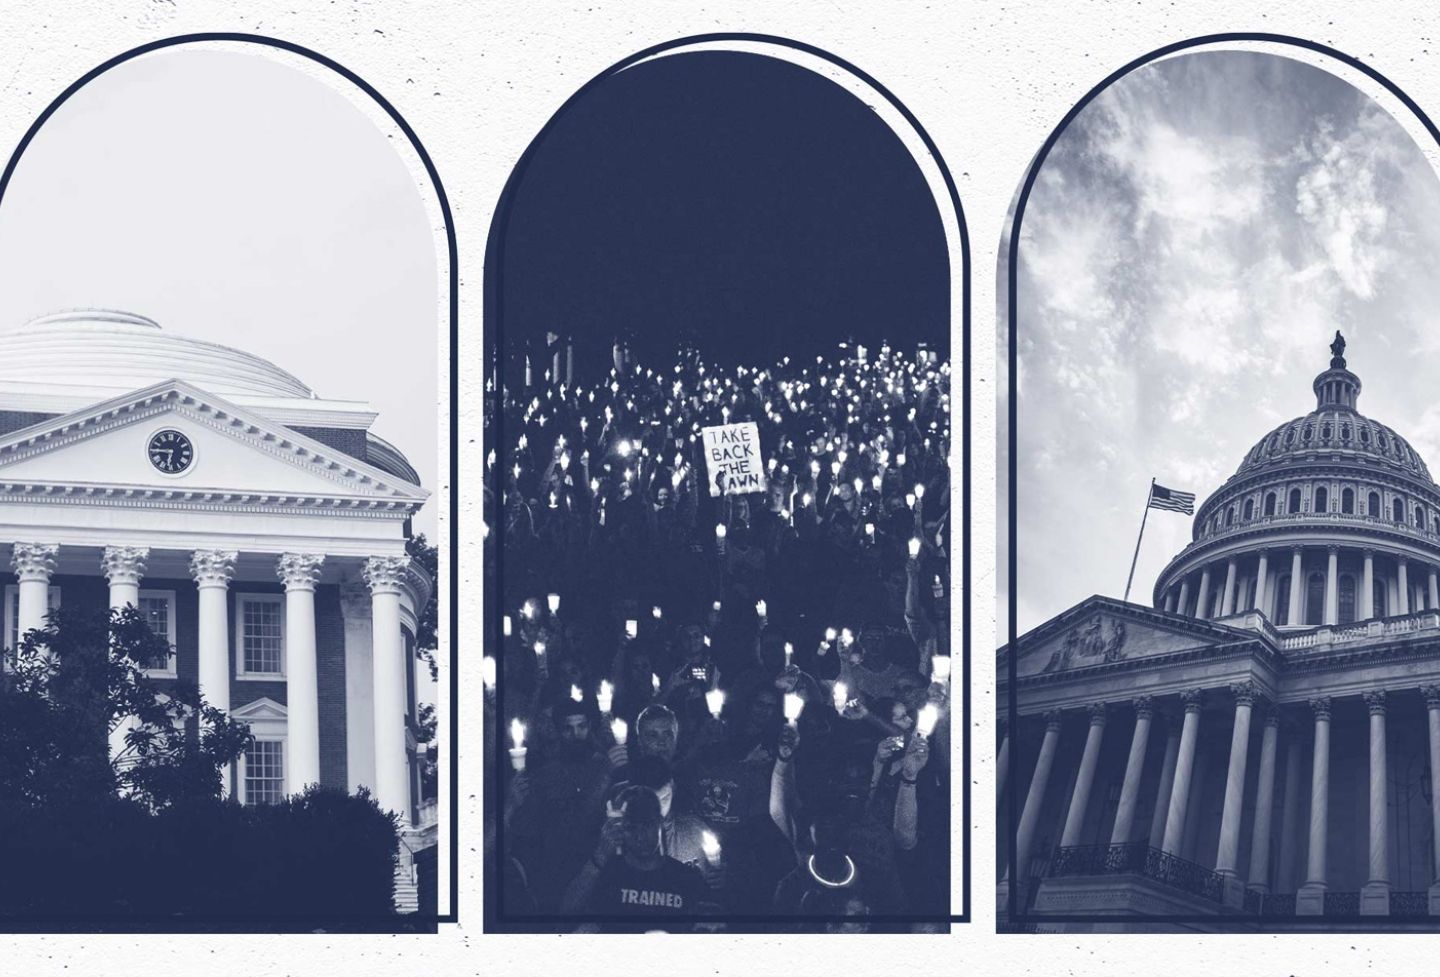 Illustration showing UVA, the vigil in the aftermath and the U.S. Capitol